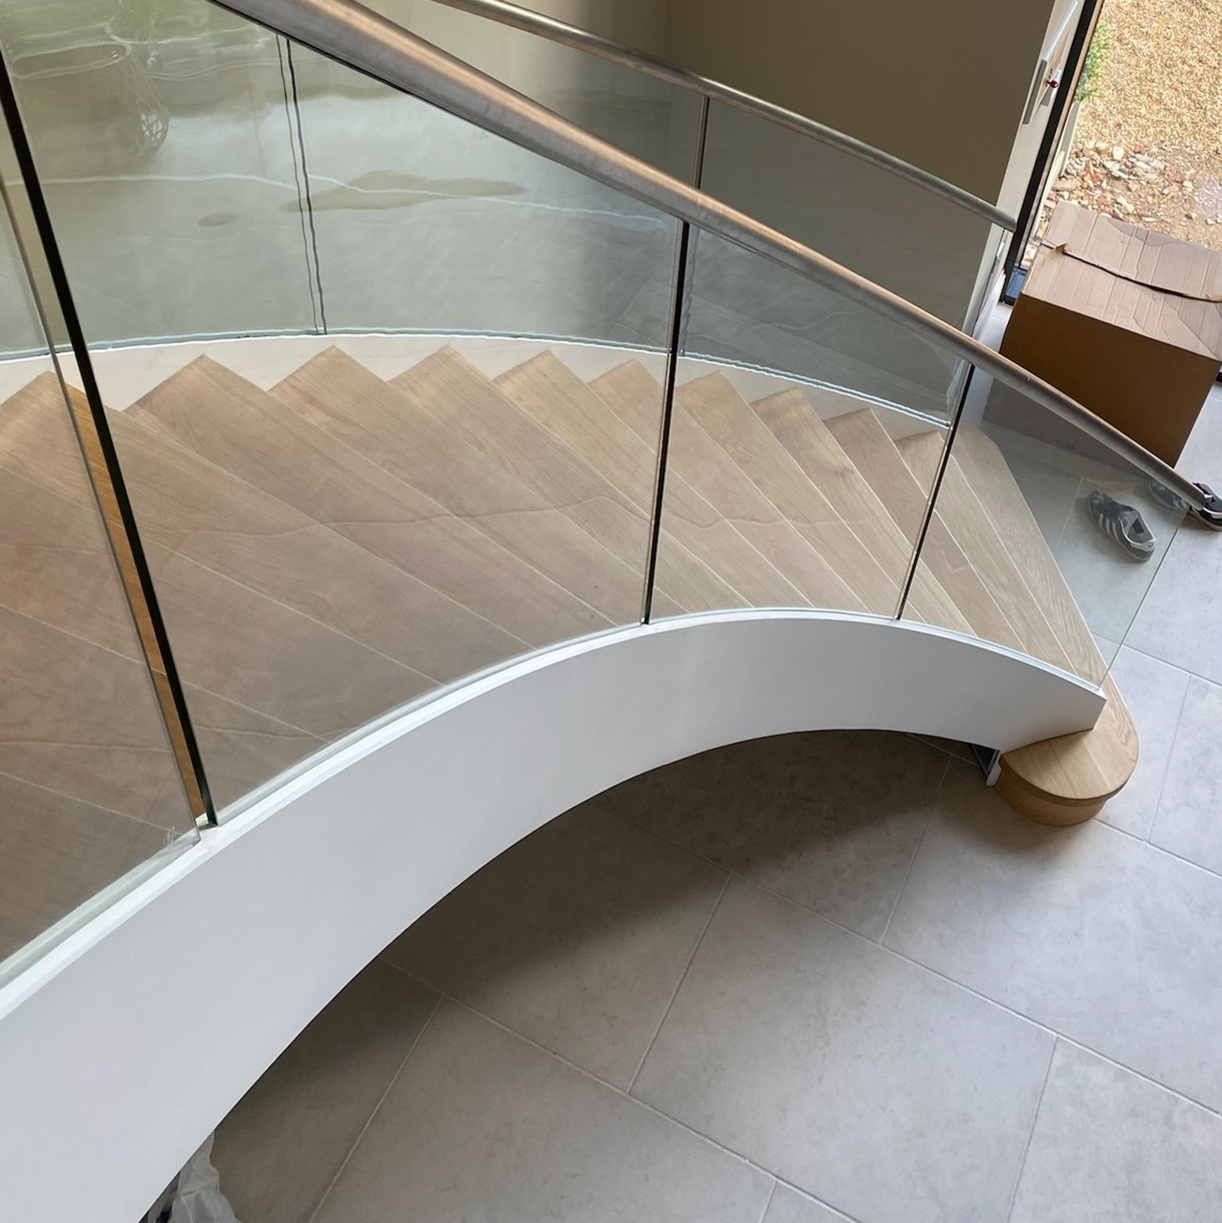 Curved stairs with white mastic applied to the outer edge on glass join where the panel meets the wood